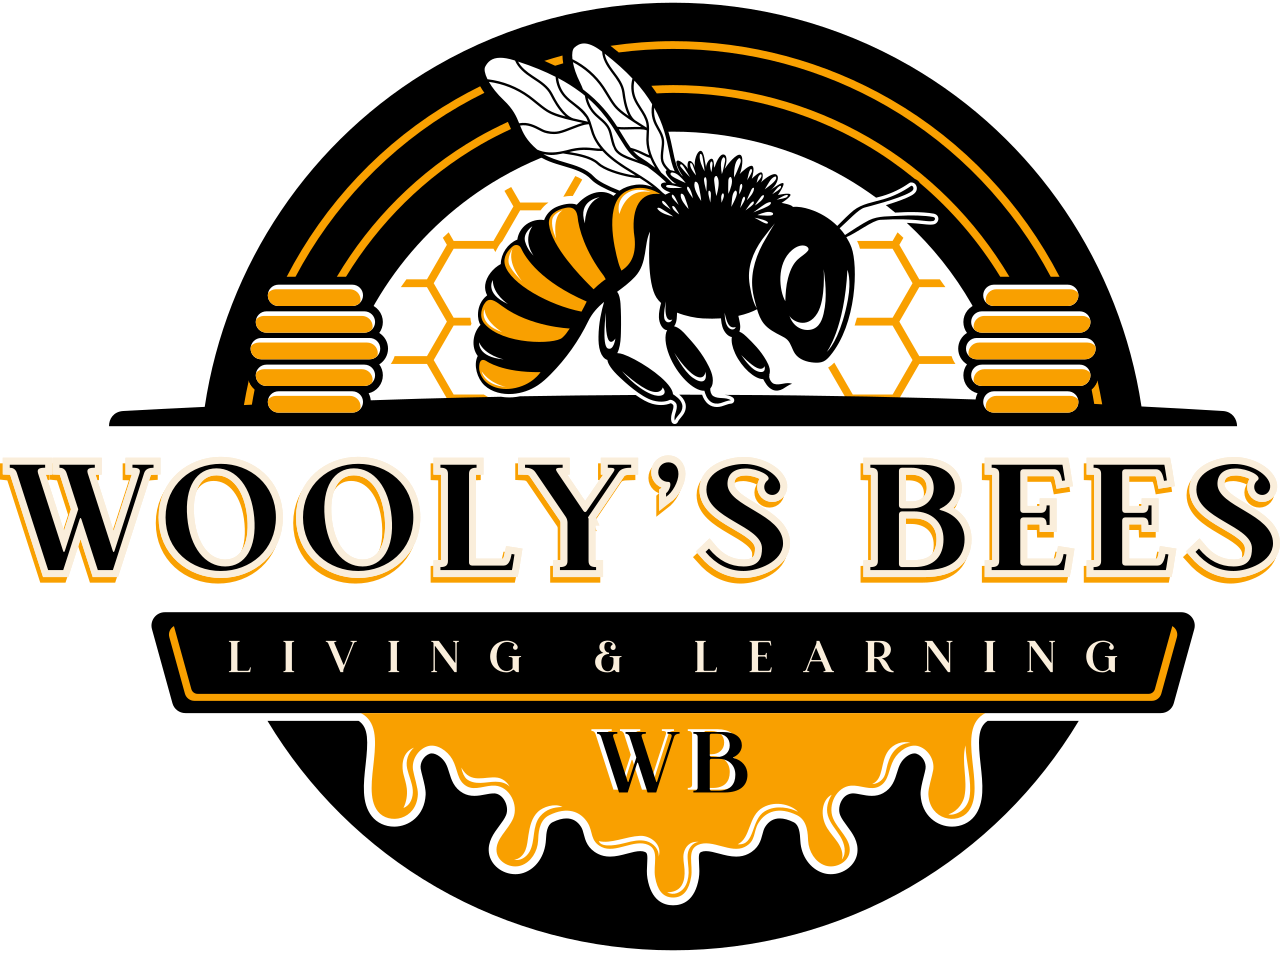 Wooly's Bees 's logo